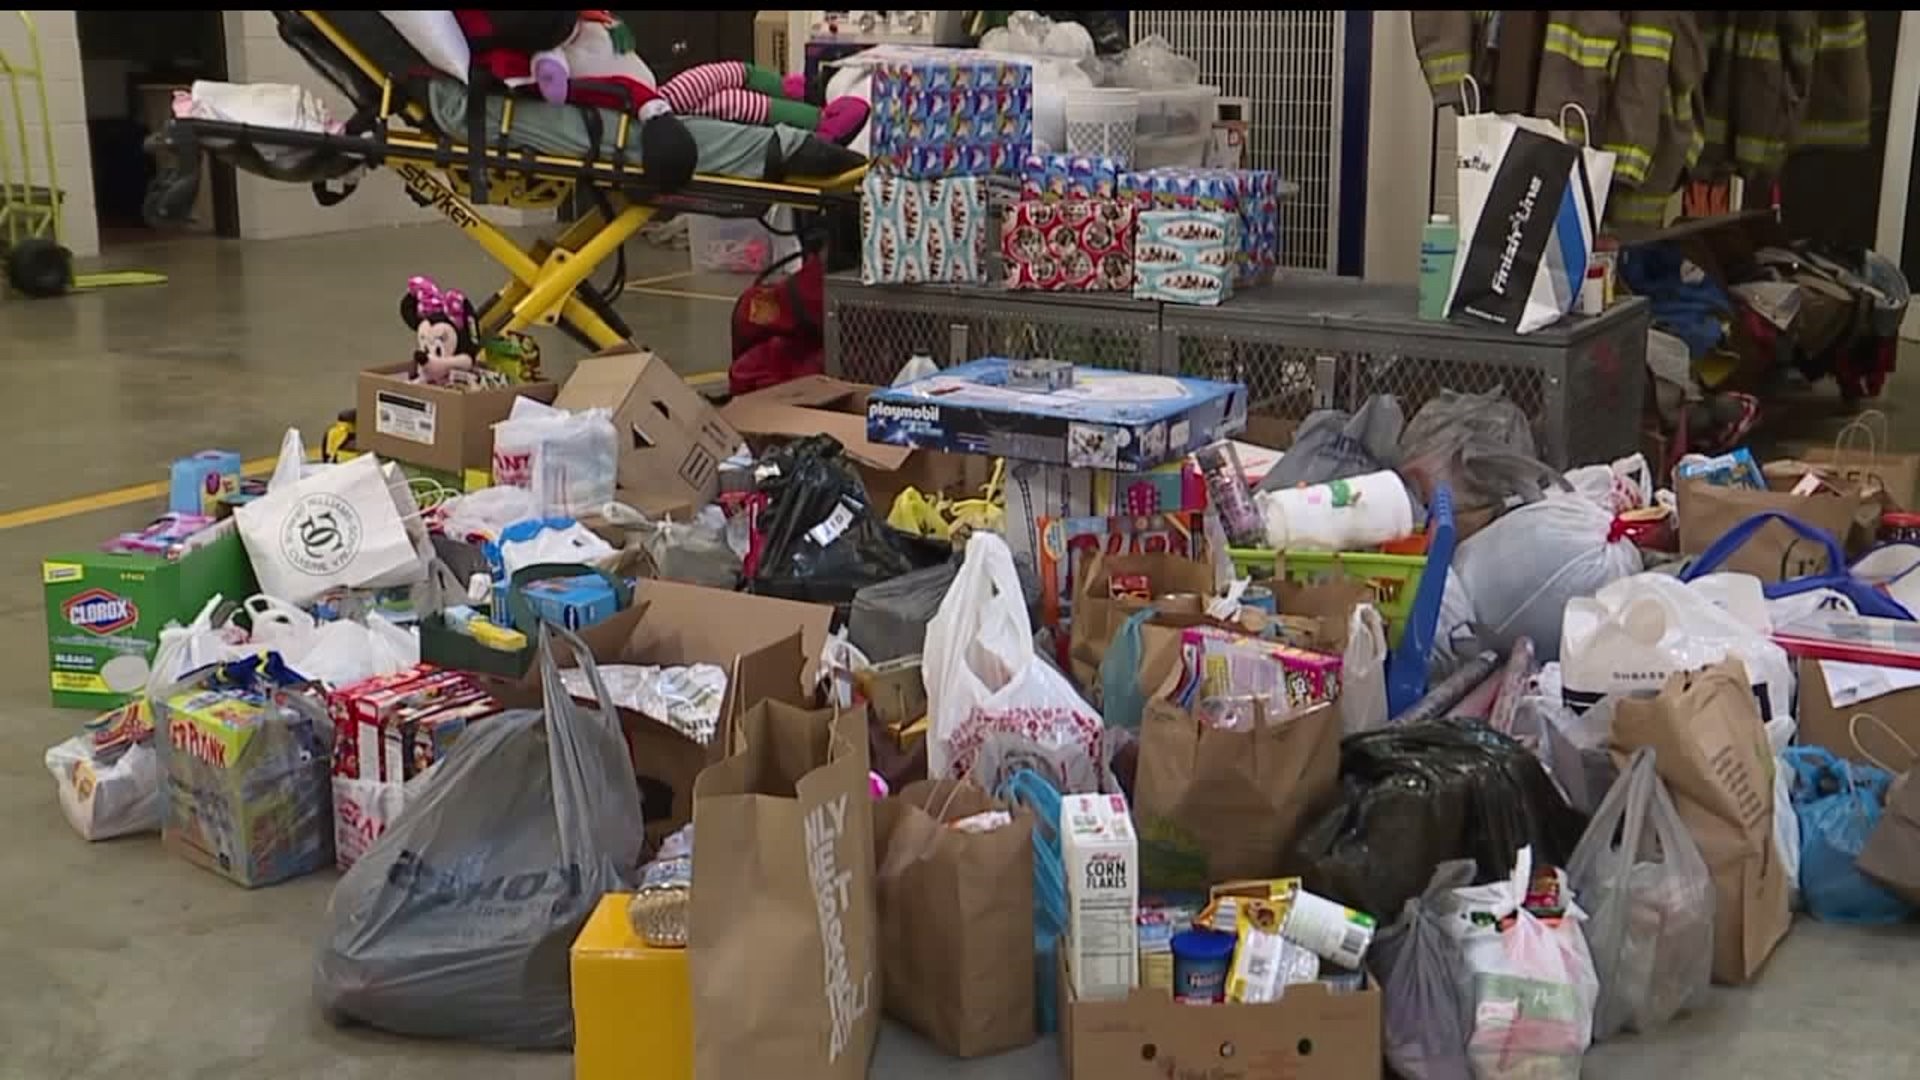 Santa picks up donations for needy families in Gettysburg